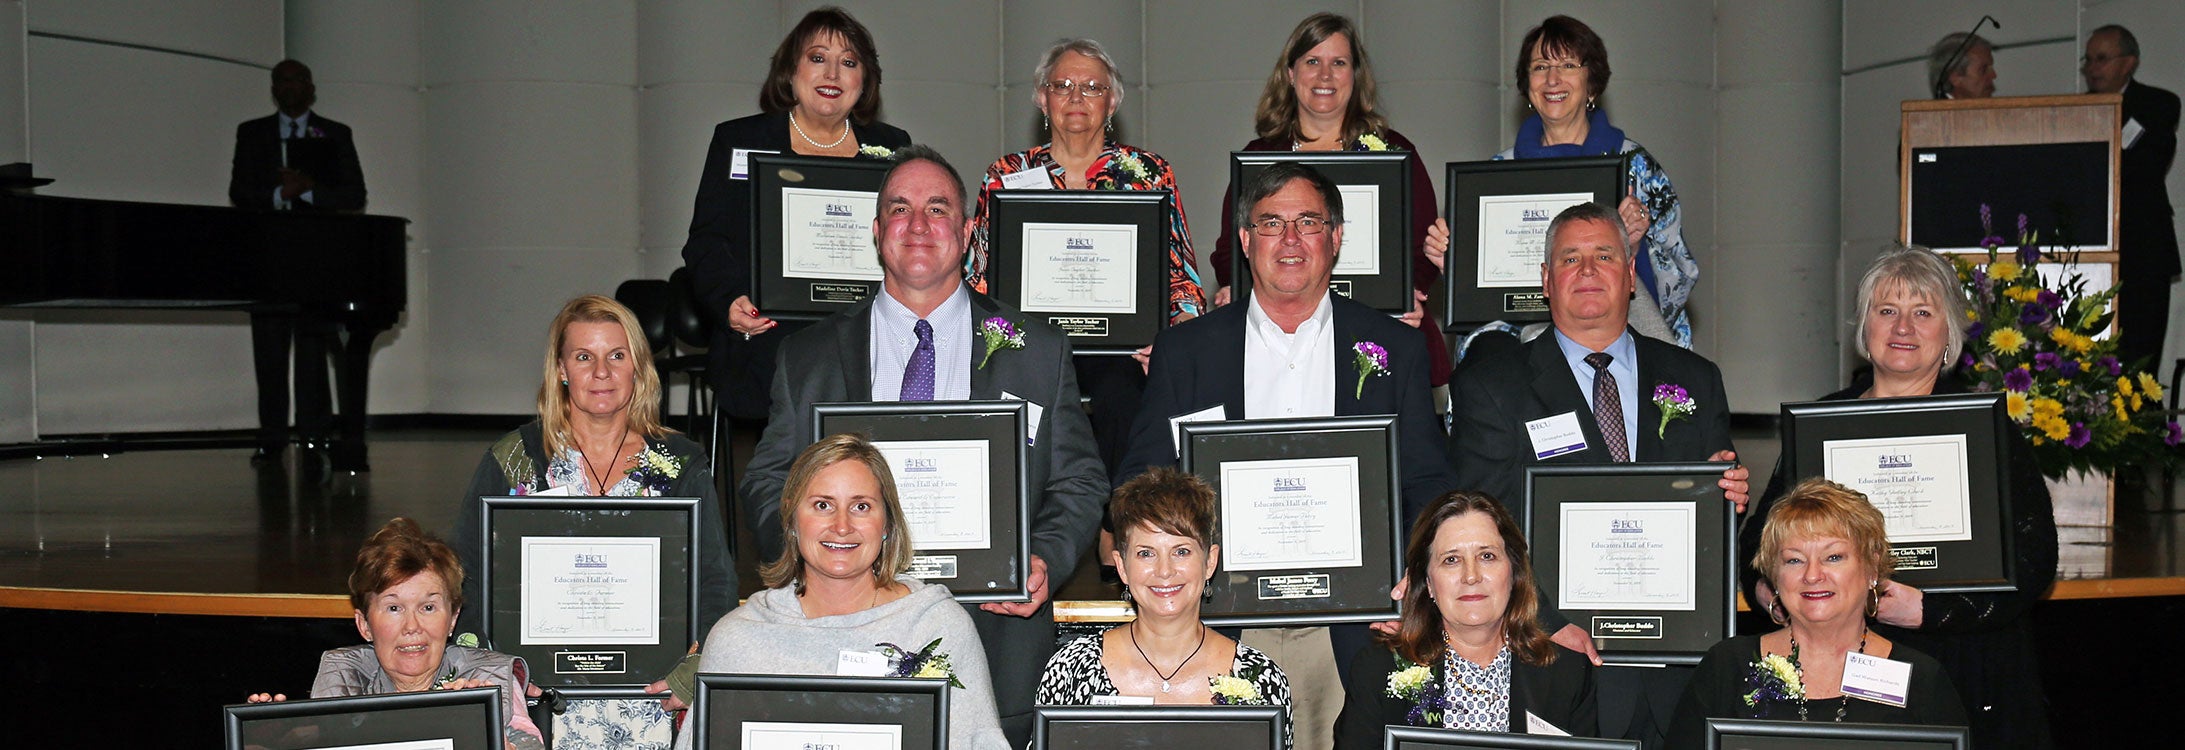 Members of the 2019 class of inductees to the ECU College of Education Educators Hall of Fame include, back row, from left, Madeline Davis Tucker, Janis Taylor Tucker, Lynne C. Wigent, and Alana M. Zambone; middle row, from left, Christa L. Farmer, Mark Edward L’Esperance, a representative for the late Mabel James Perry, J. Christopher Buddo, and Kathy Godley Clark; and front row, from left, Kathy Sue Gaskins Riggs, Lynn Pritchett Harrington, Sherry Rae Buck, Andrea Mills Blackwood, and Gail Watson Richards. (Photo by Kristen Martin)